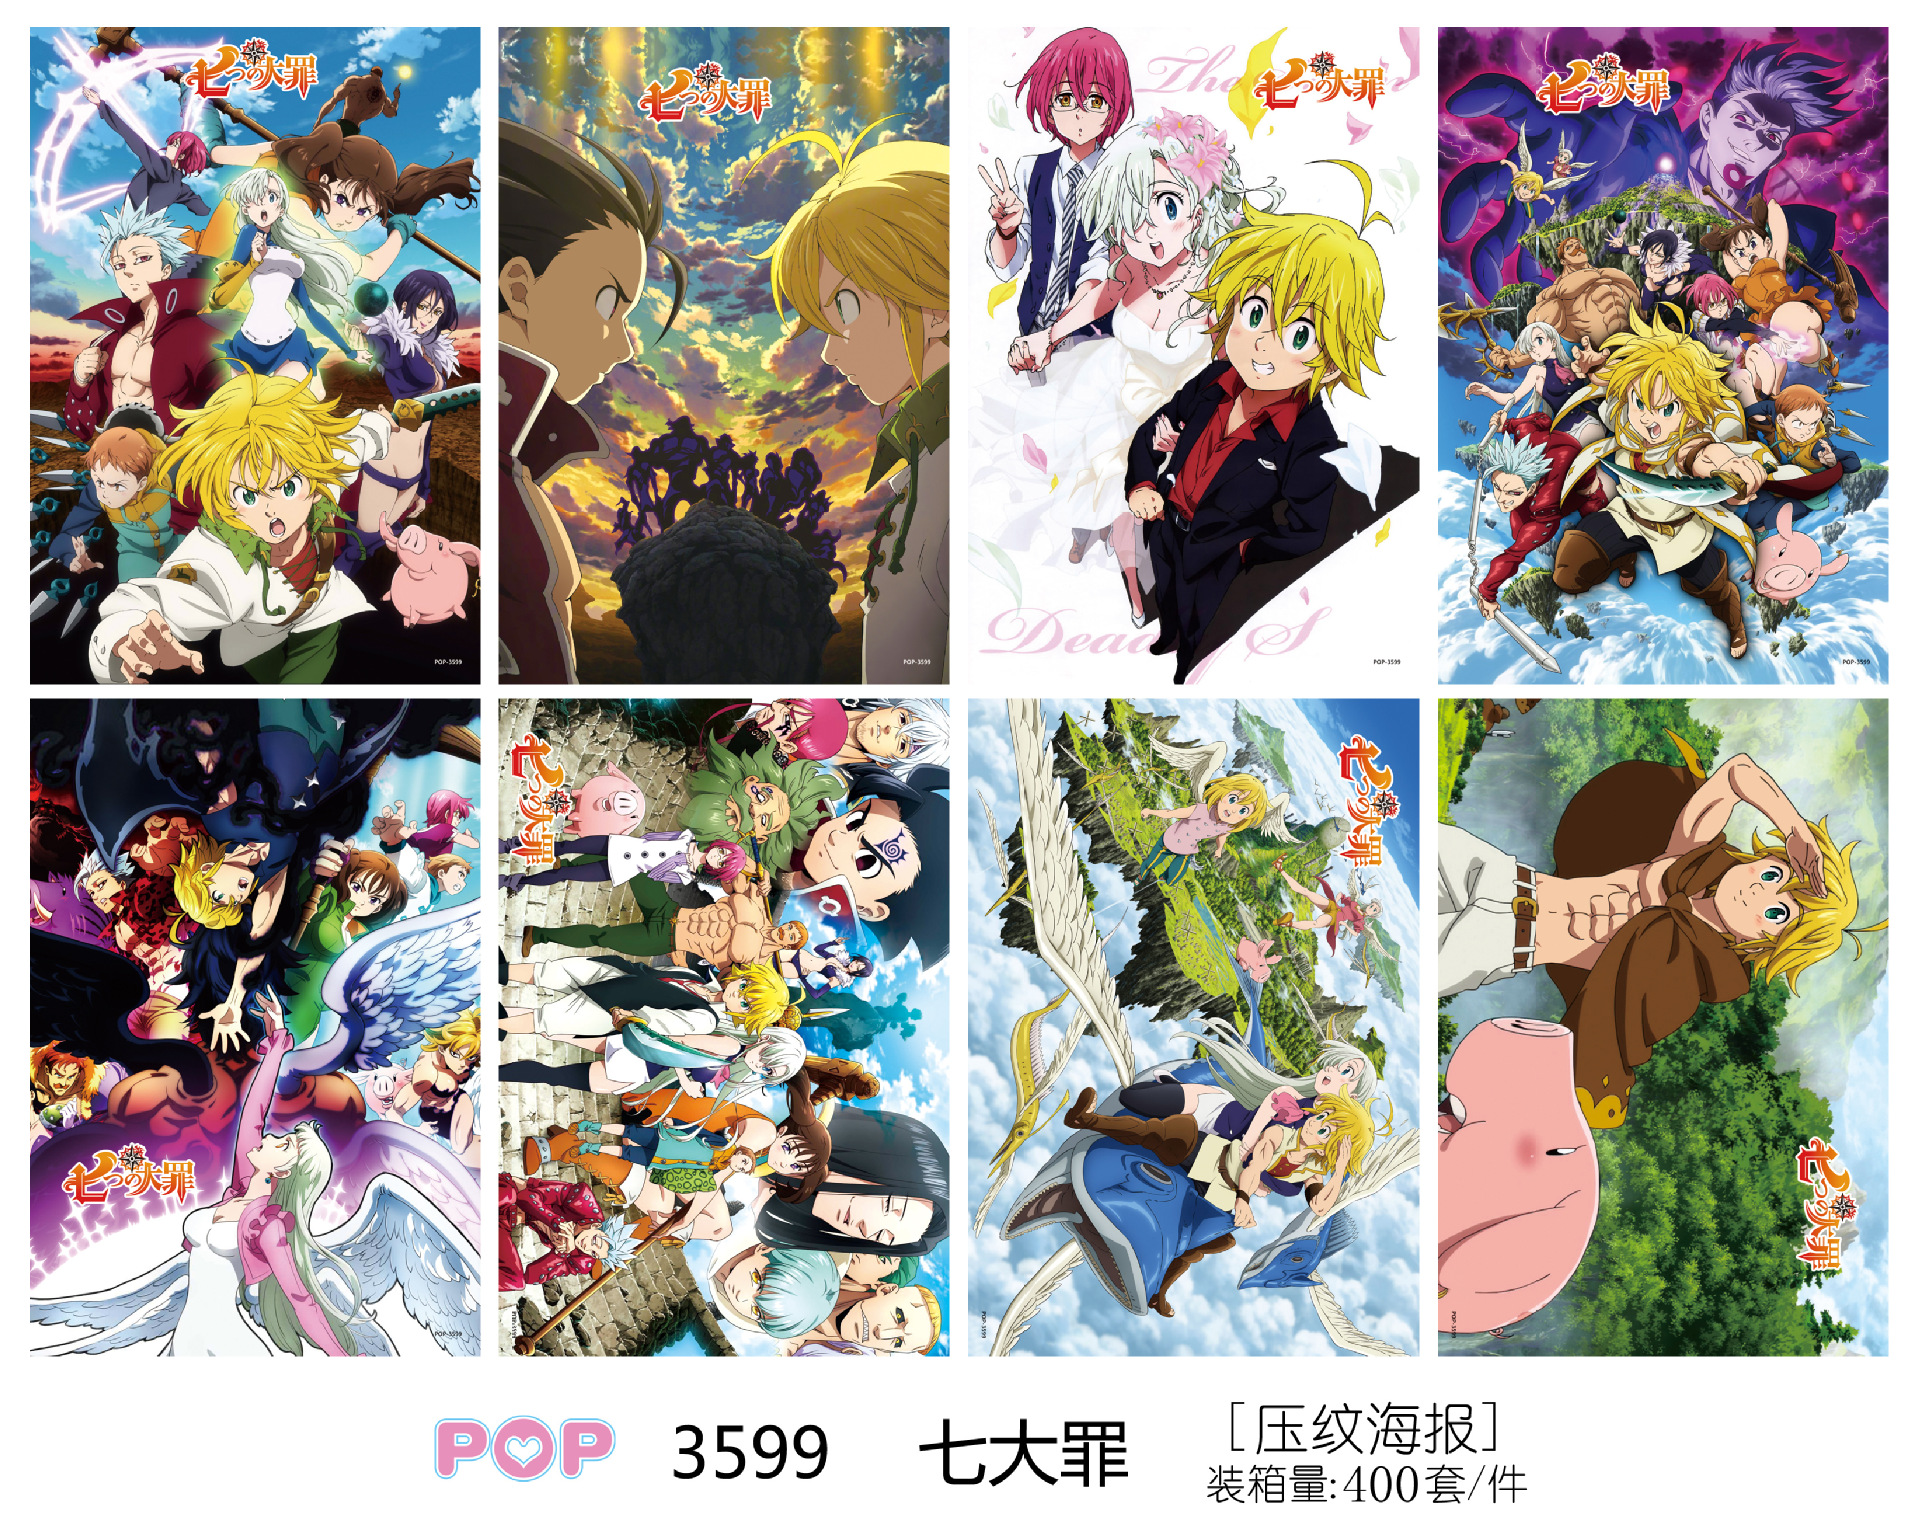 seven deadly sins anime poster price for a set of 8 pcs